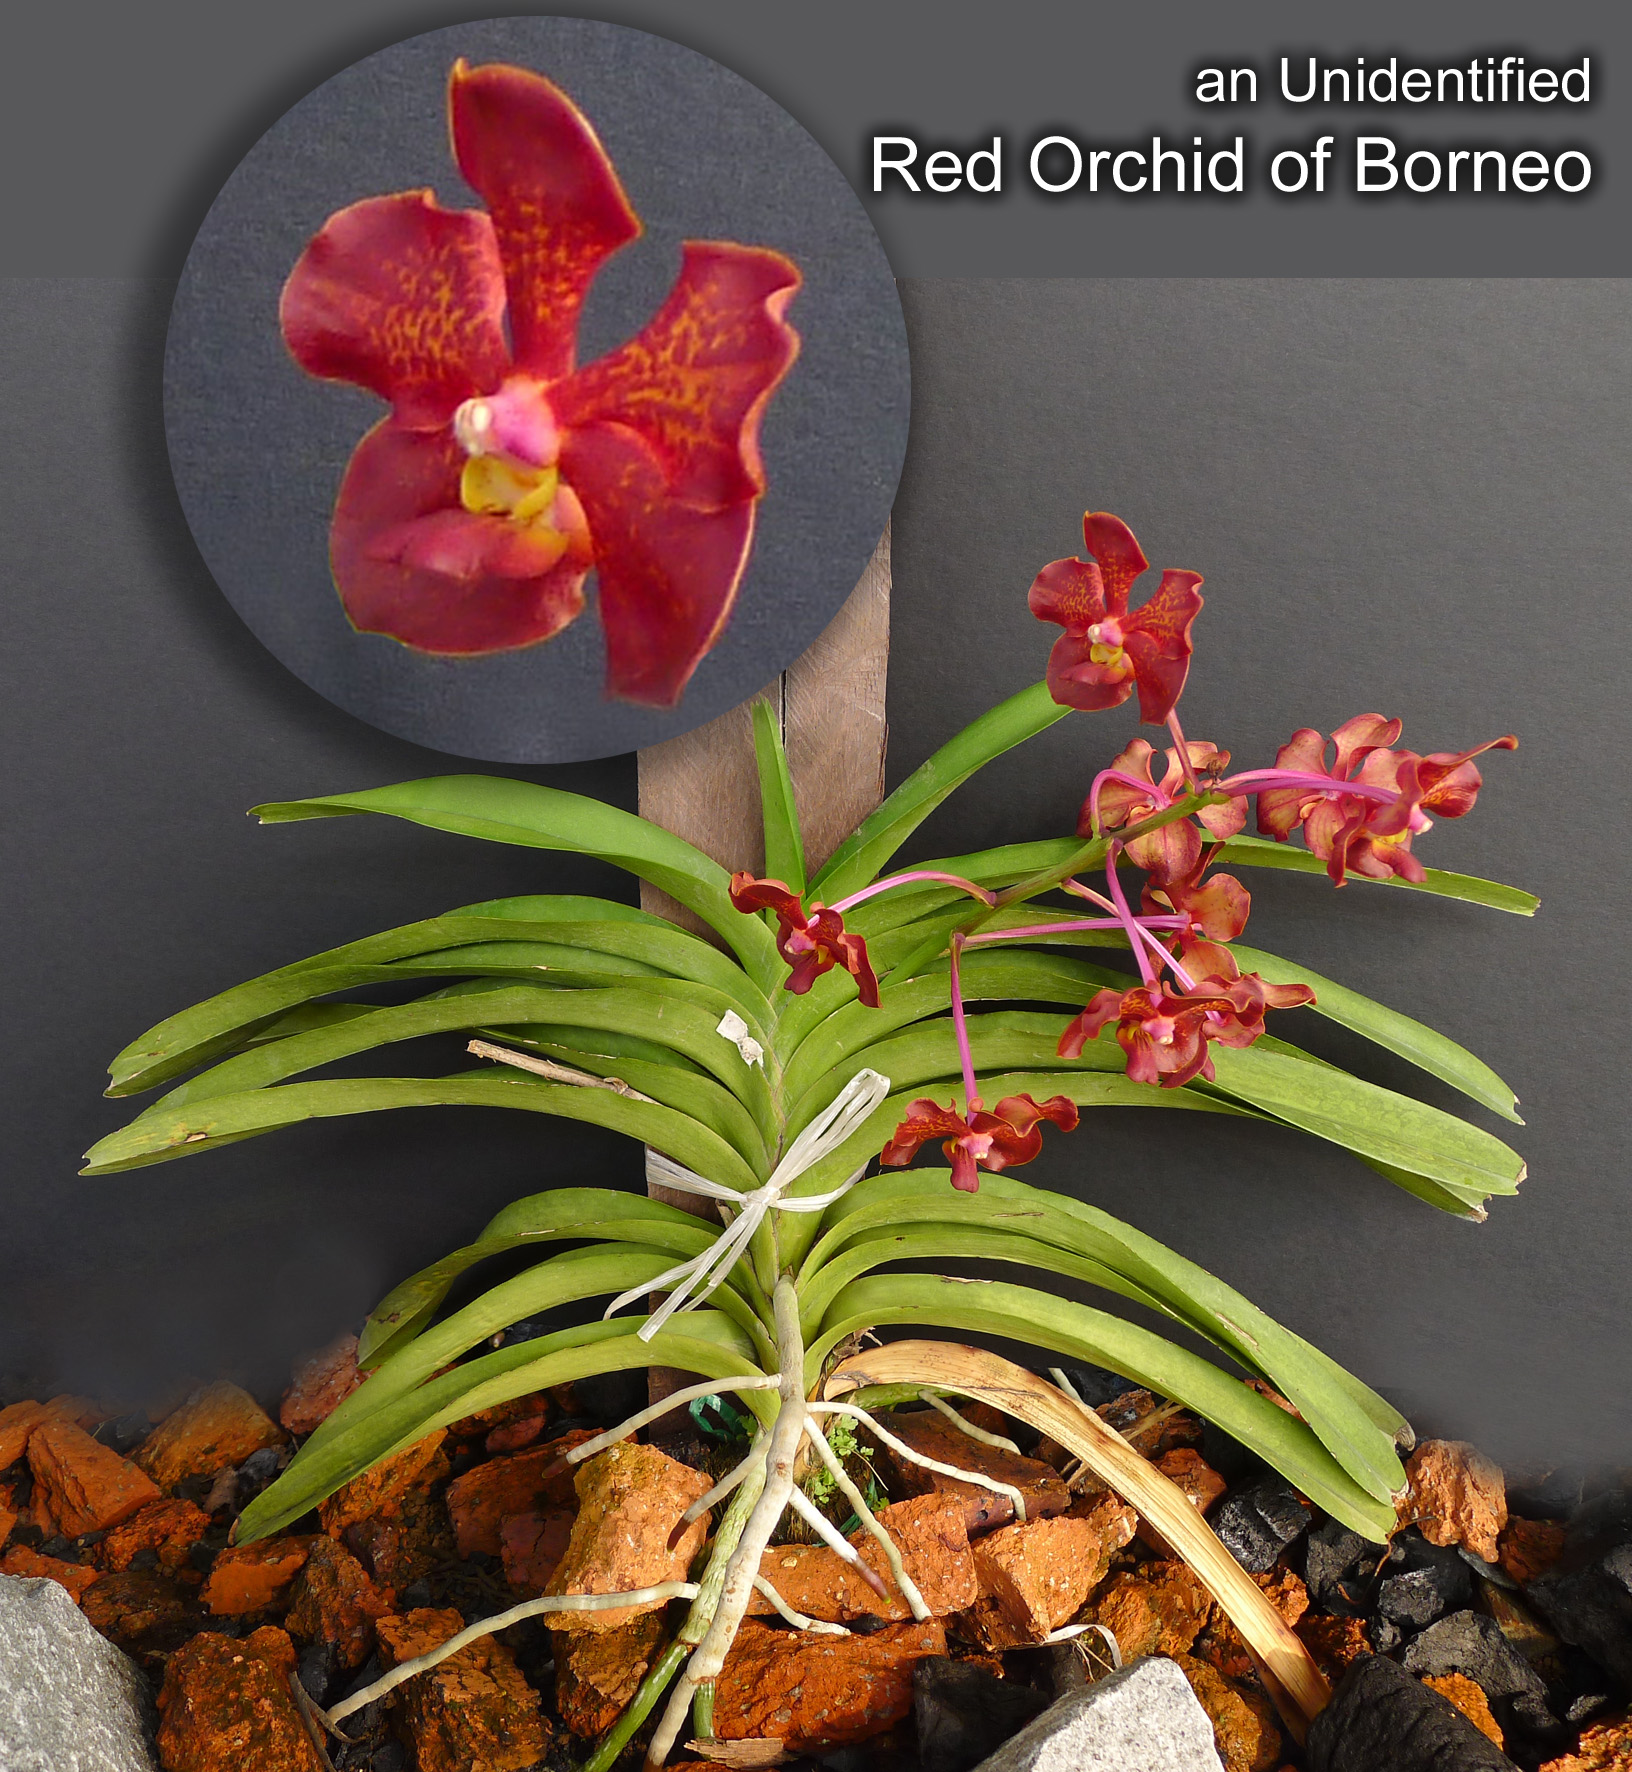 an Unidentified Red Orchid of Borneo